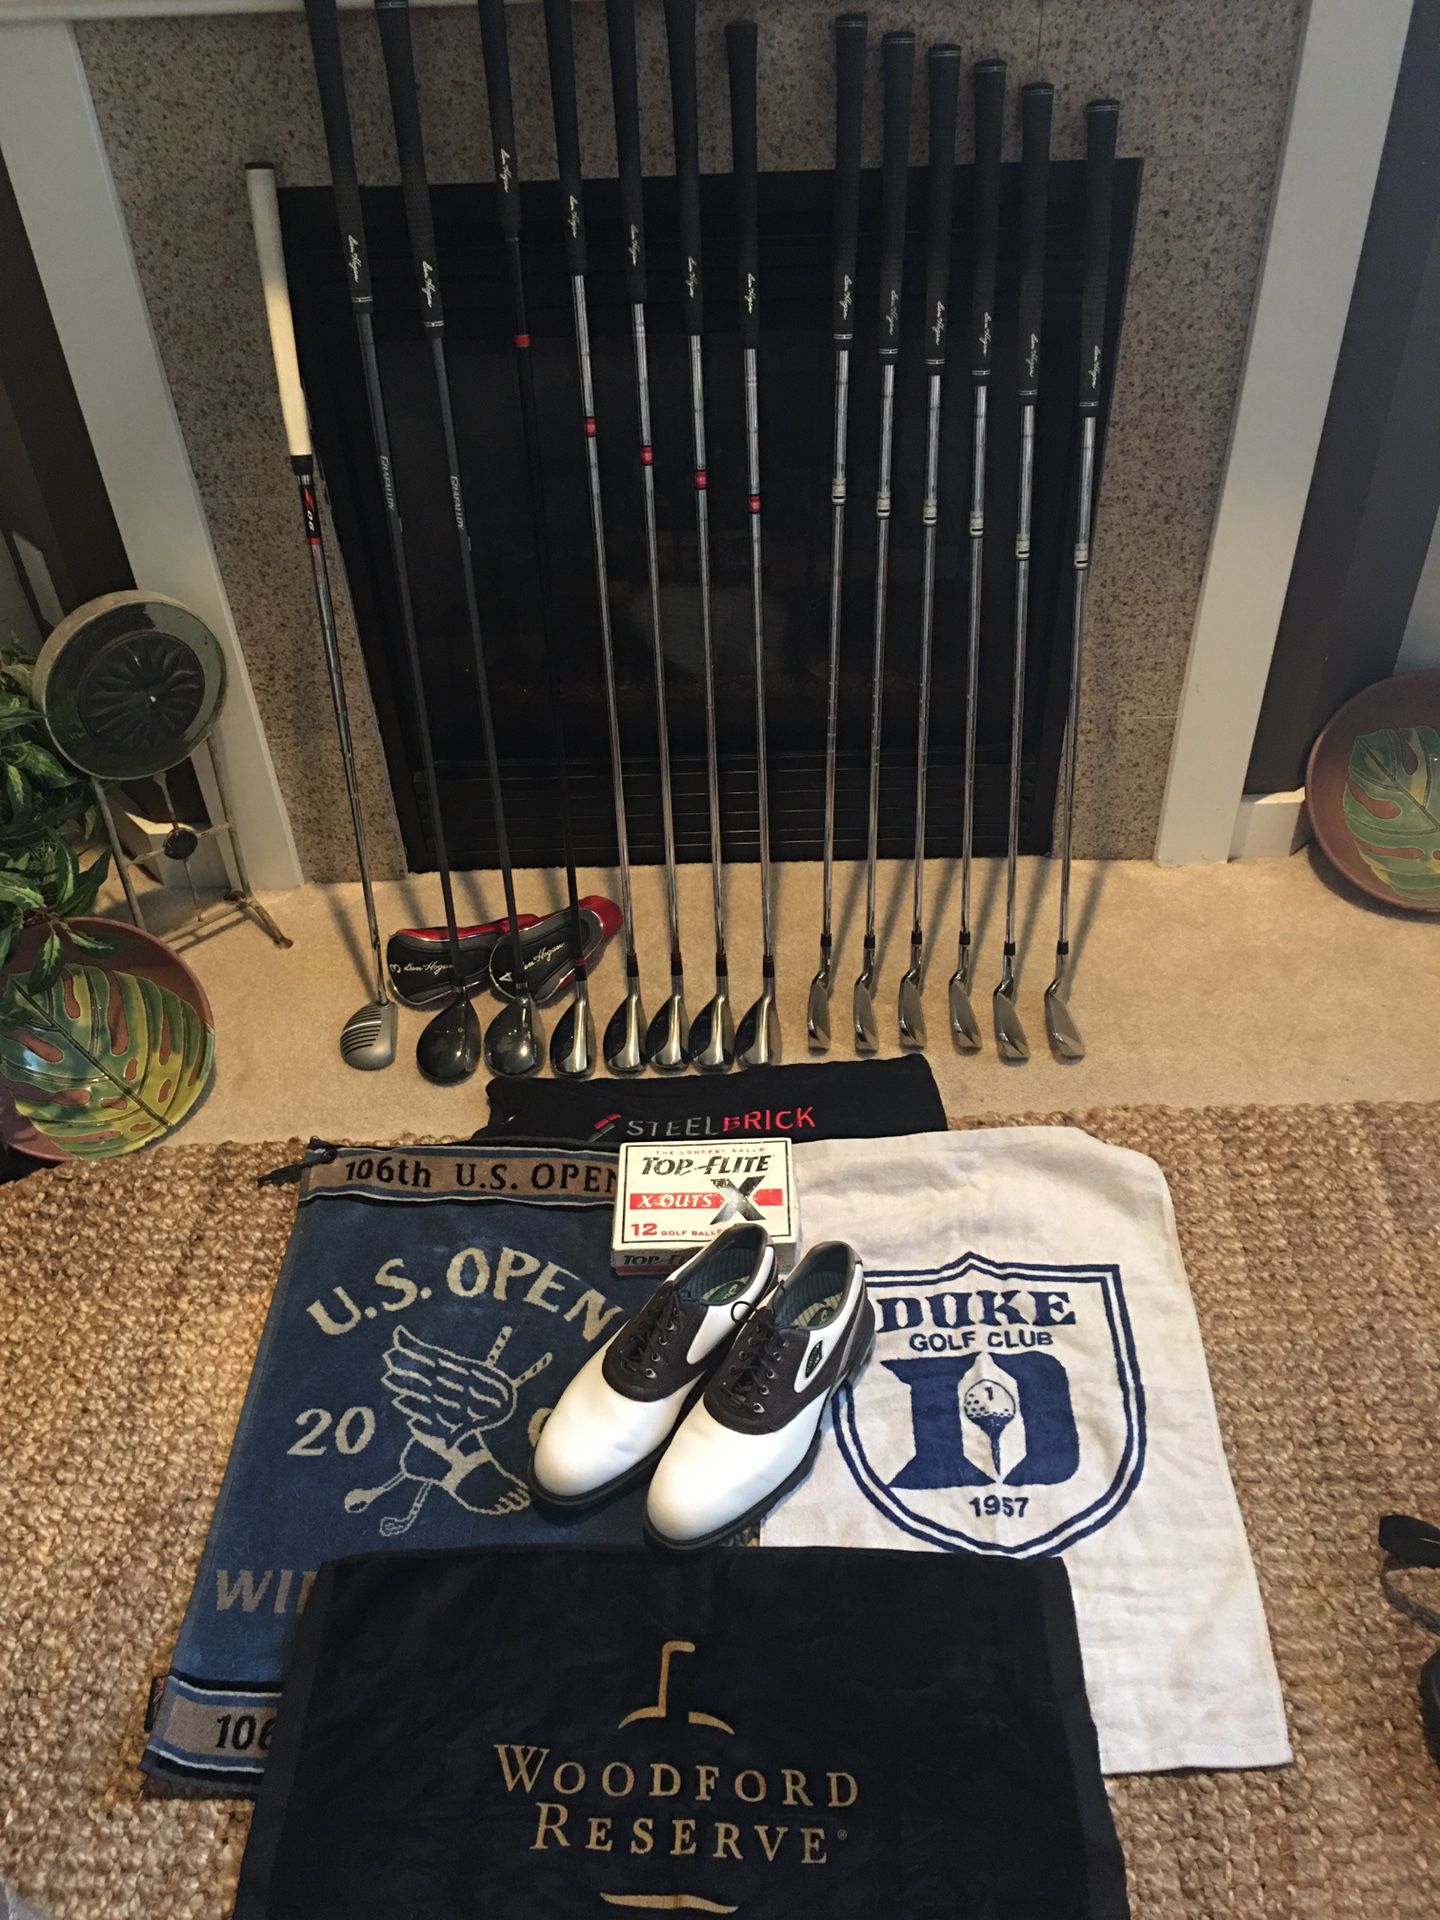 Beautiful Ben Hogan Colonial Irons Drivers And CFT Hybrid Fairway Woods with New Bag Balls Shoes Etc